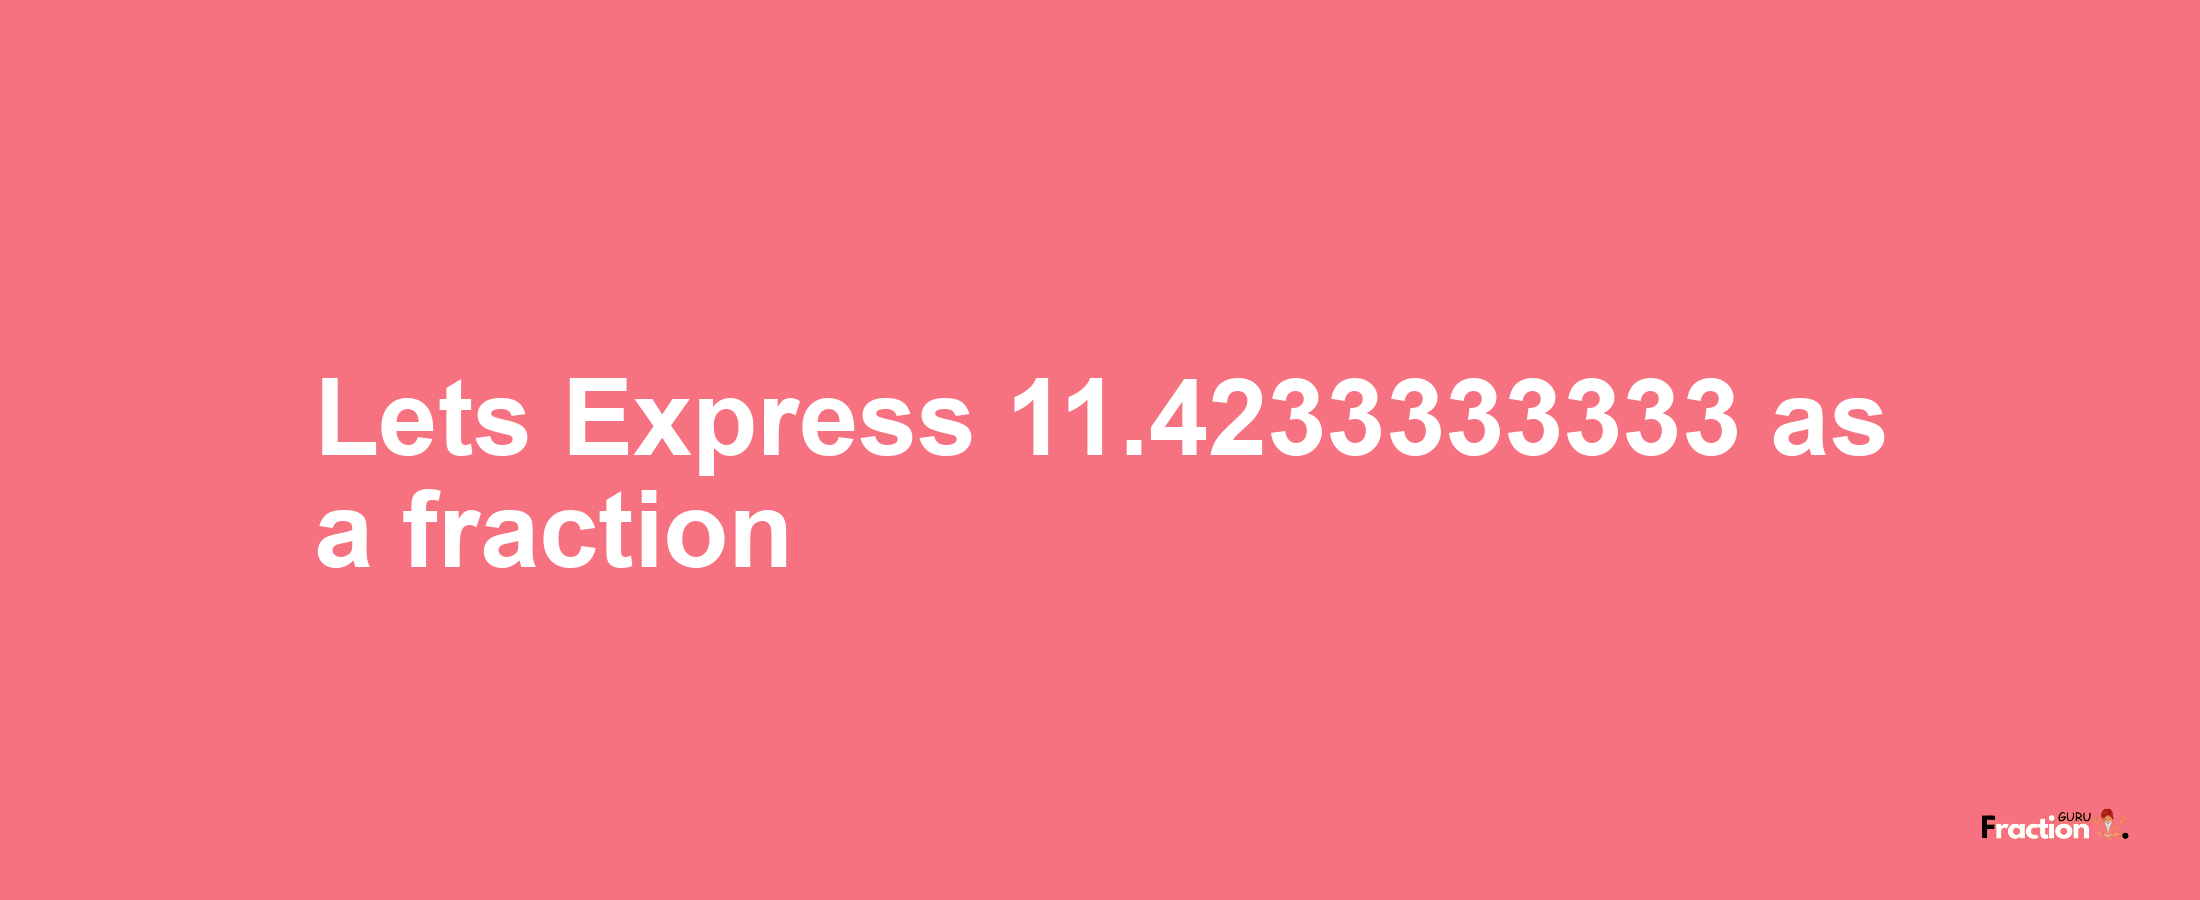 Lets Express 11.4233333333 as afraction